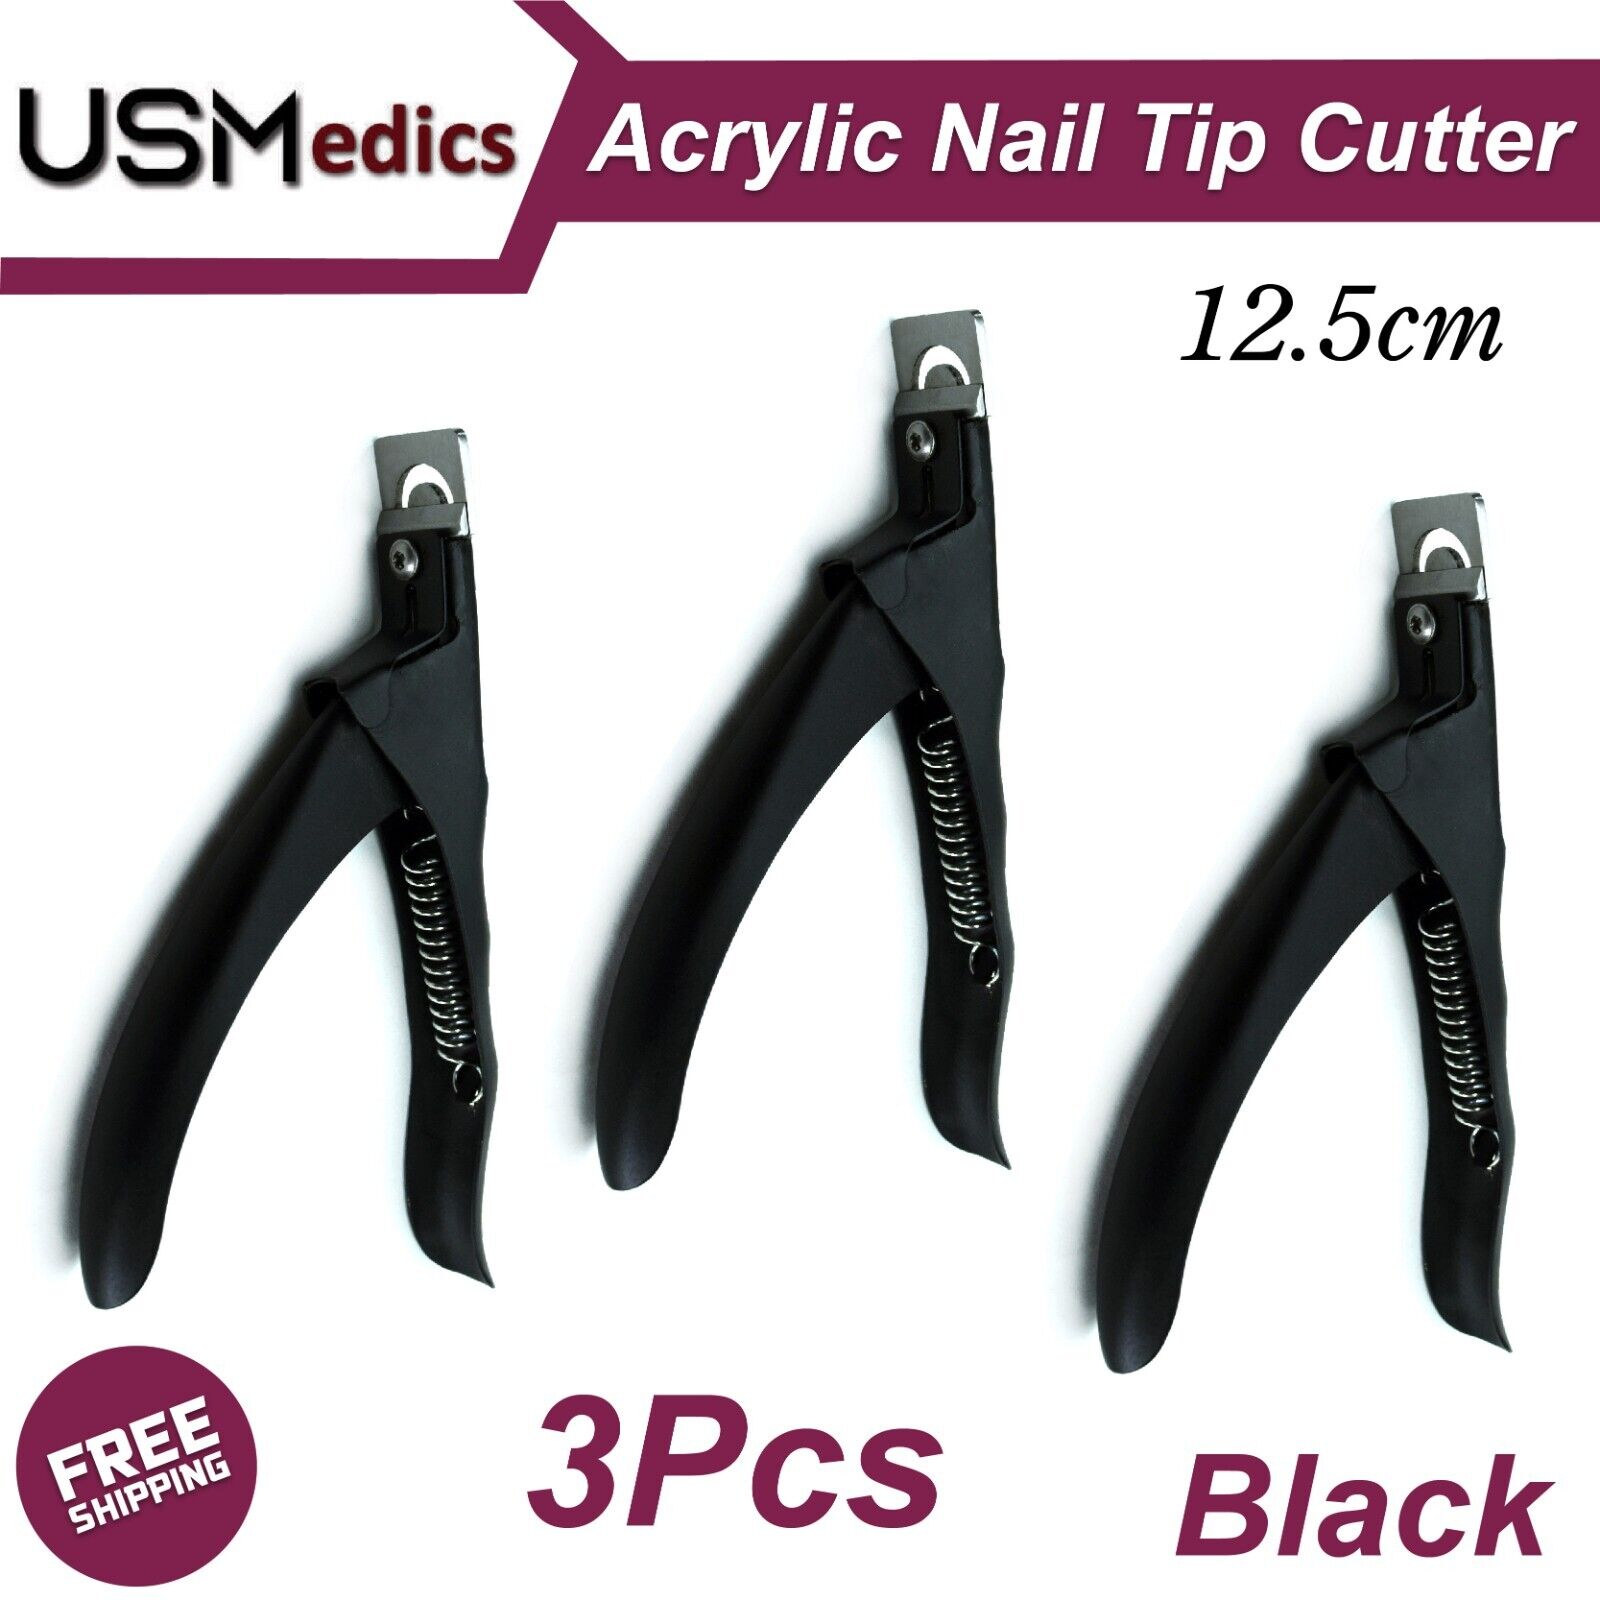 Nail Clippers for Acrylic Nails, Acrylic Nail Cutter, Acrylic Nail Clippers  with Sizer, Adjustable Nail Clipper, Nail Trimmer Nail Tip Cutter Nail Art  Tools Manicure Home DIY Black A